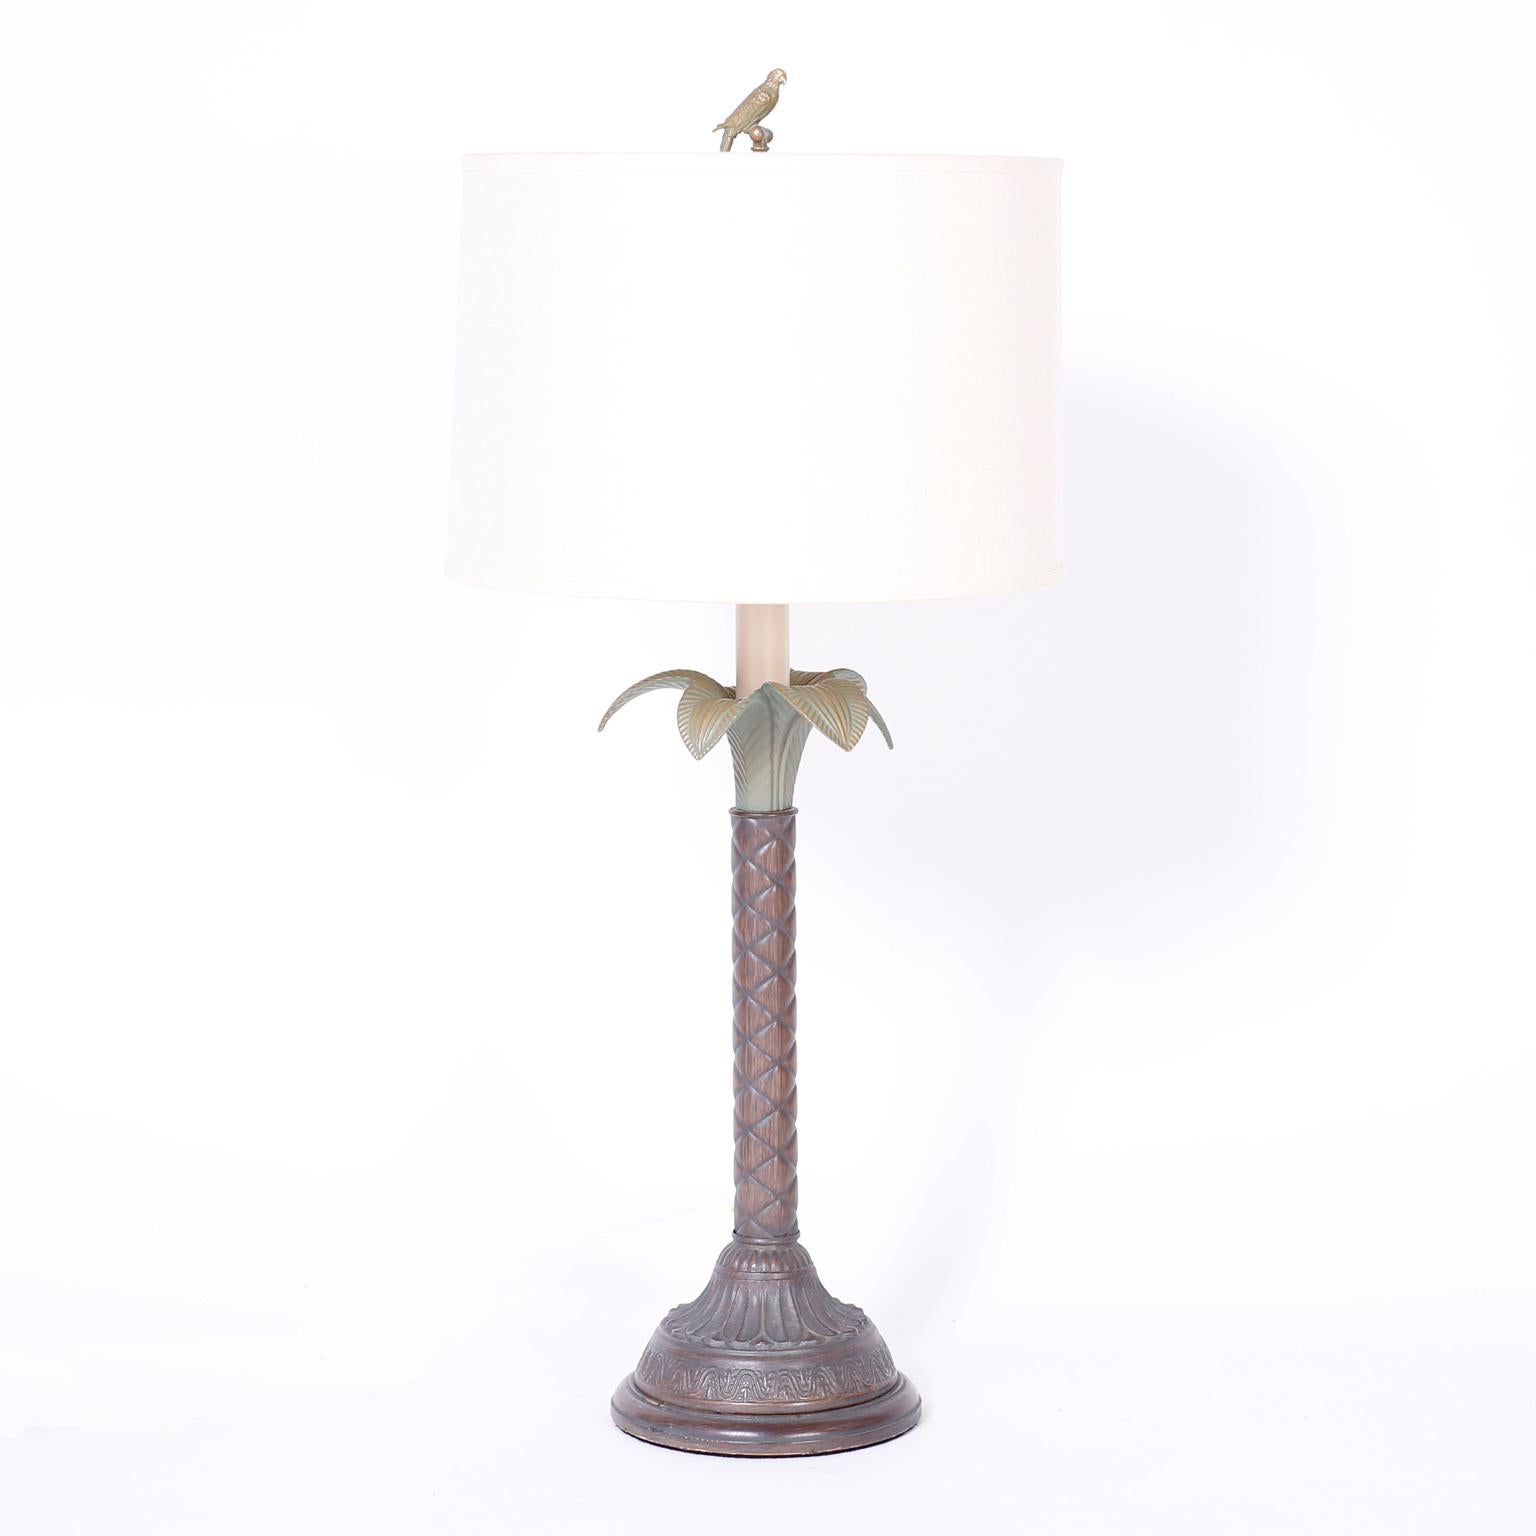 Lofty pair of midcentury tole or painted metal table lamps with cast brass bird finials over a stylized palm trees and round wood bases.